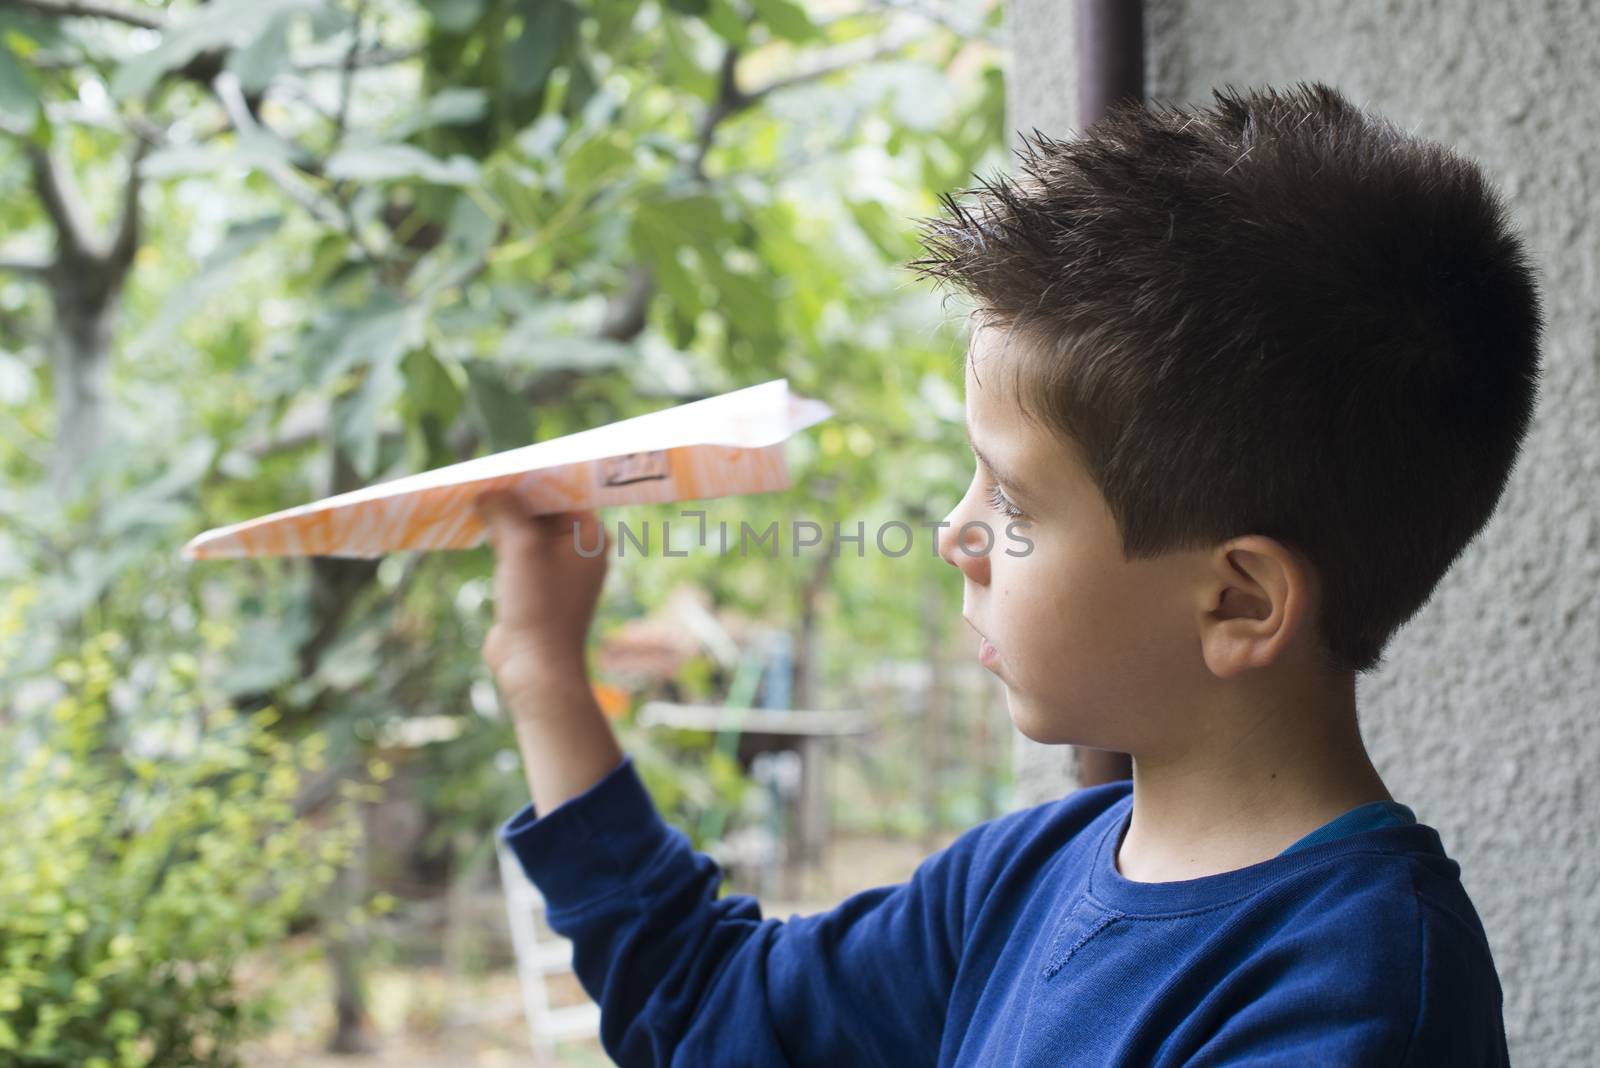 Kid throws paper plane. Authentic image